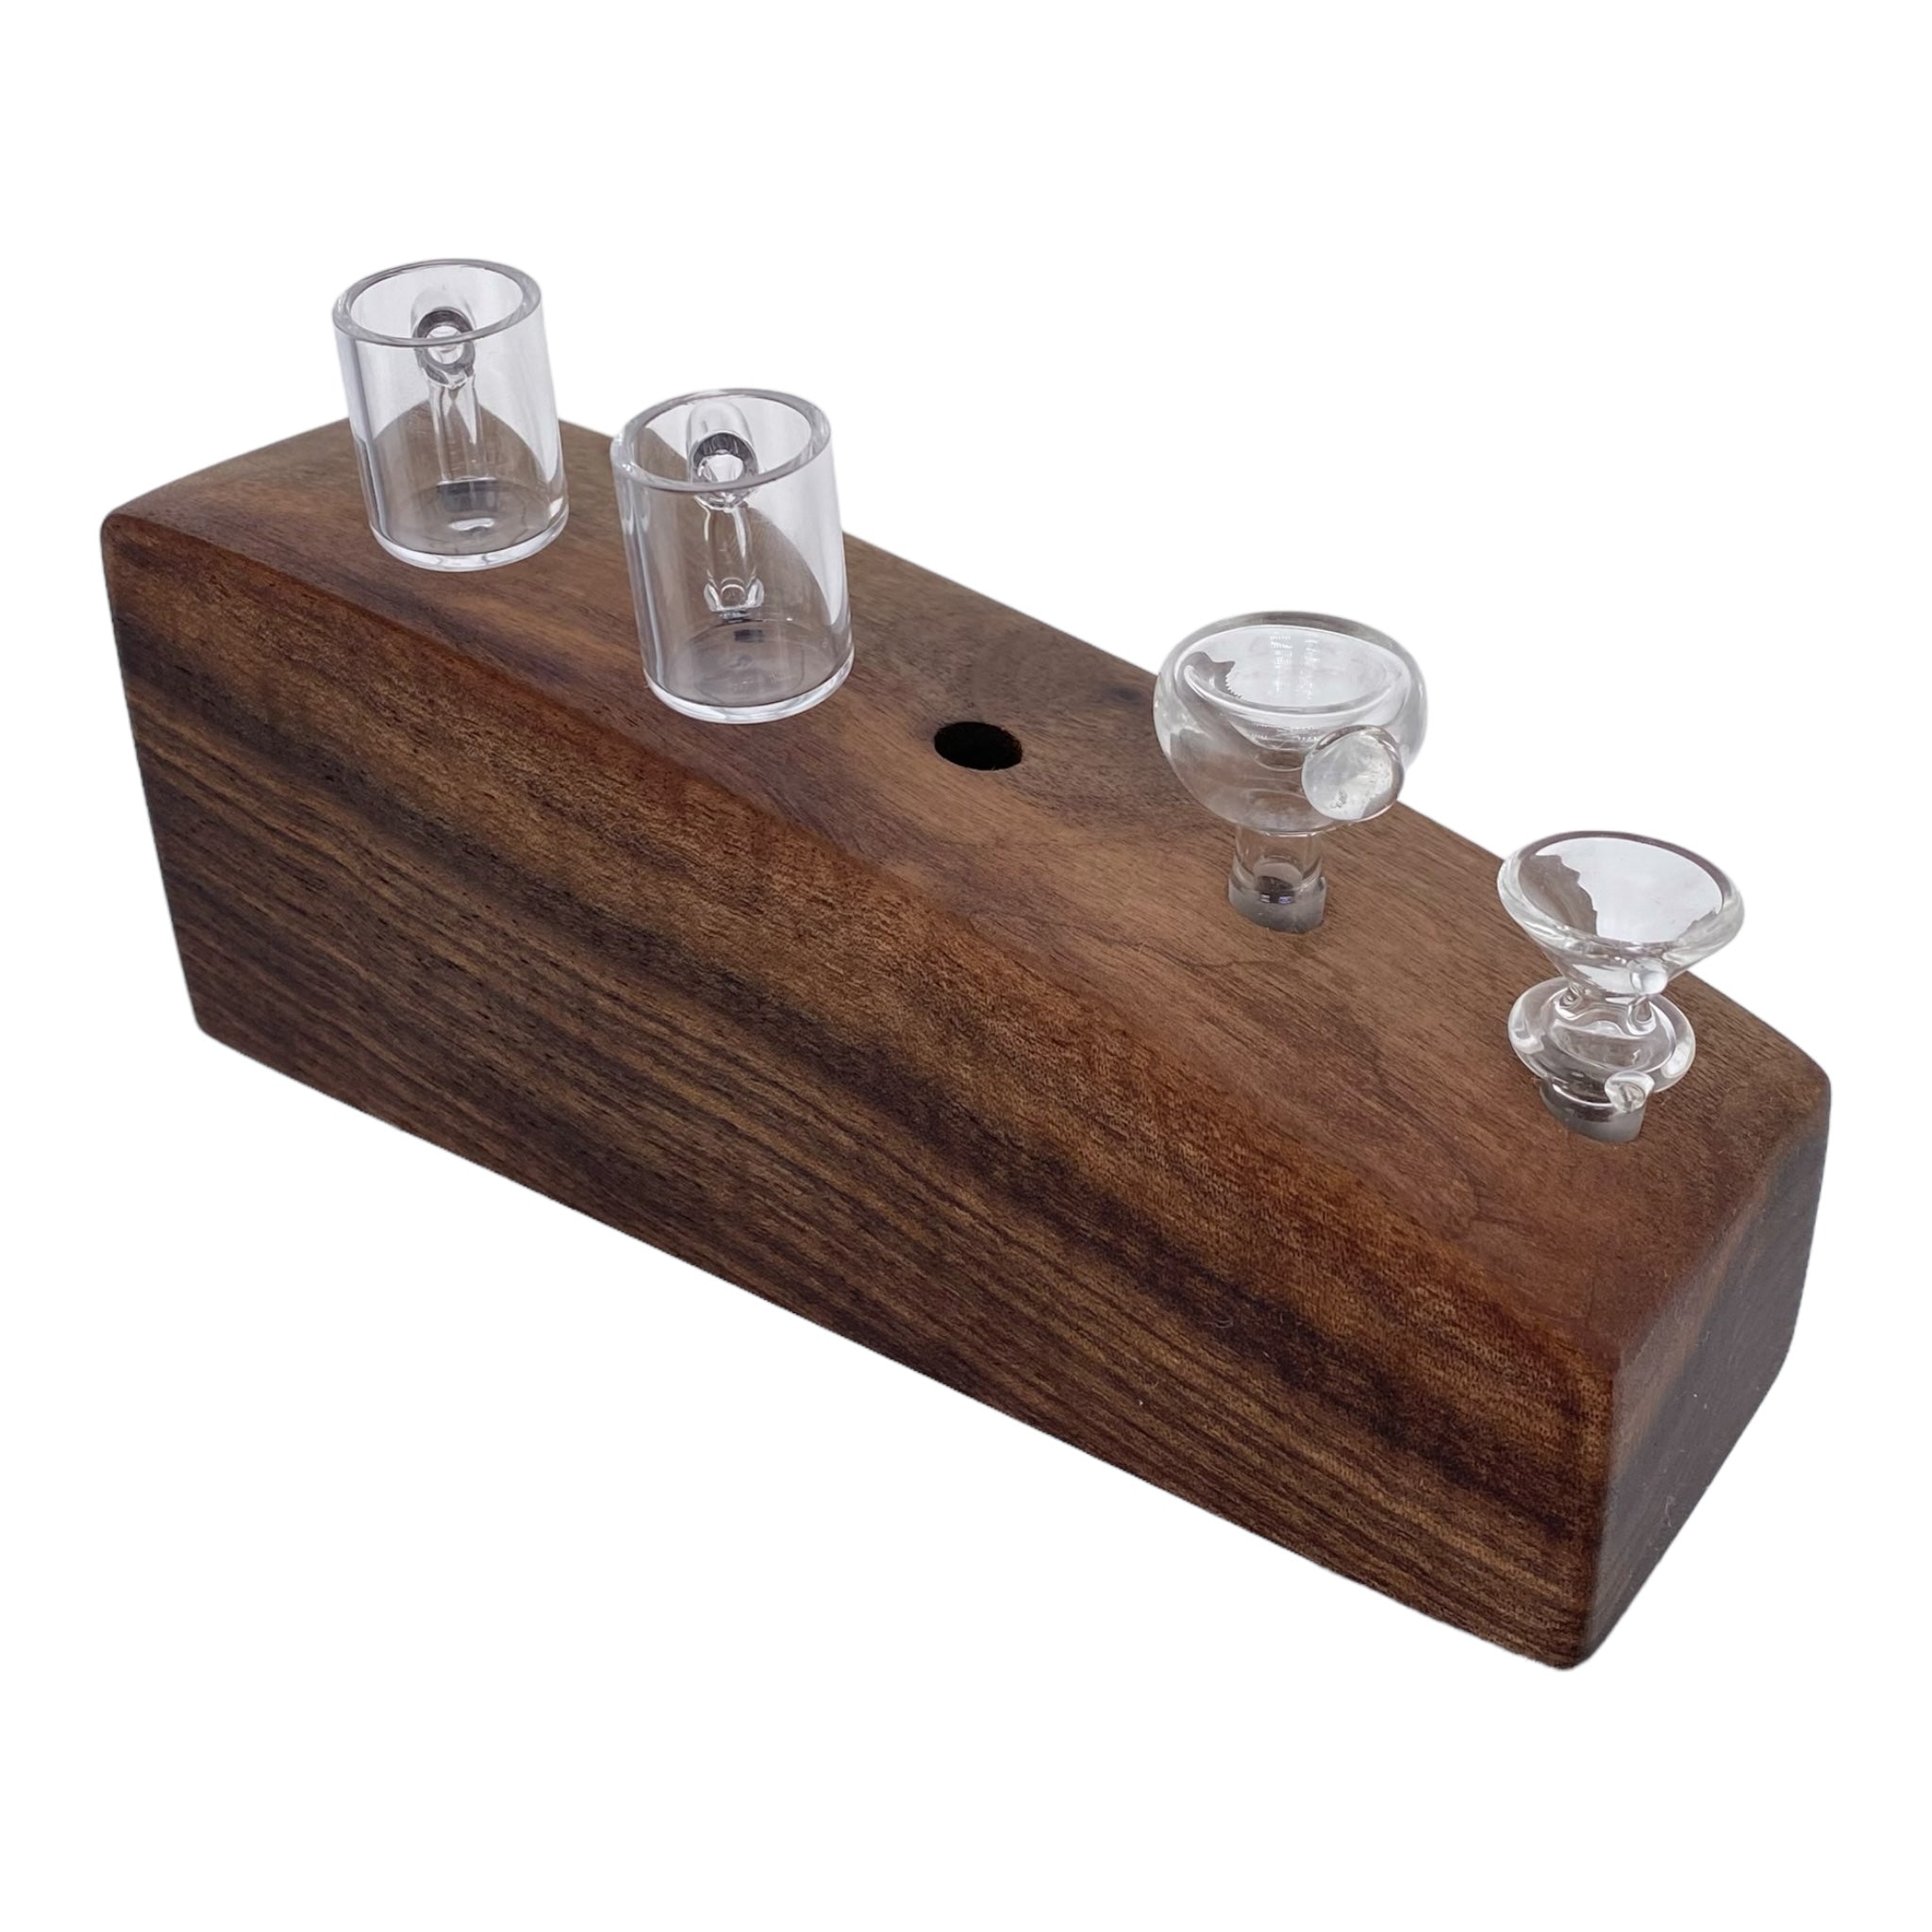 5 Hole Wood Display Stand Holder For 10mm Bong Bowl Pieces Or Quartz Bangers - Black Walnut